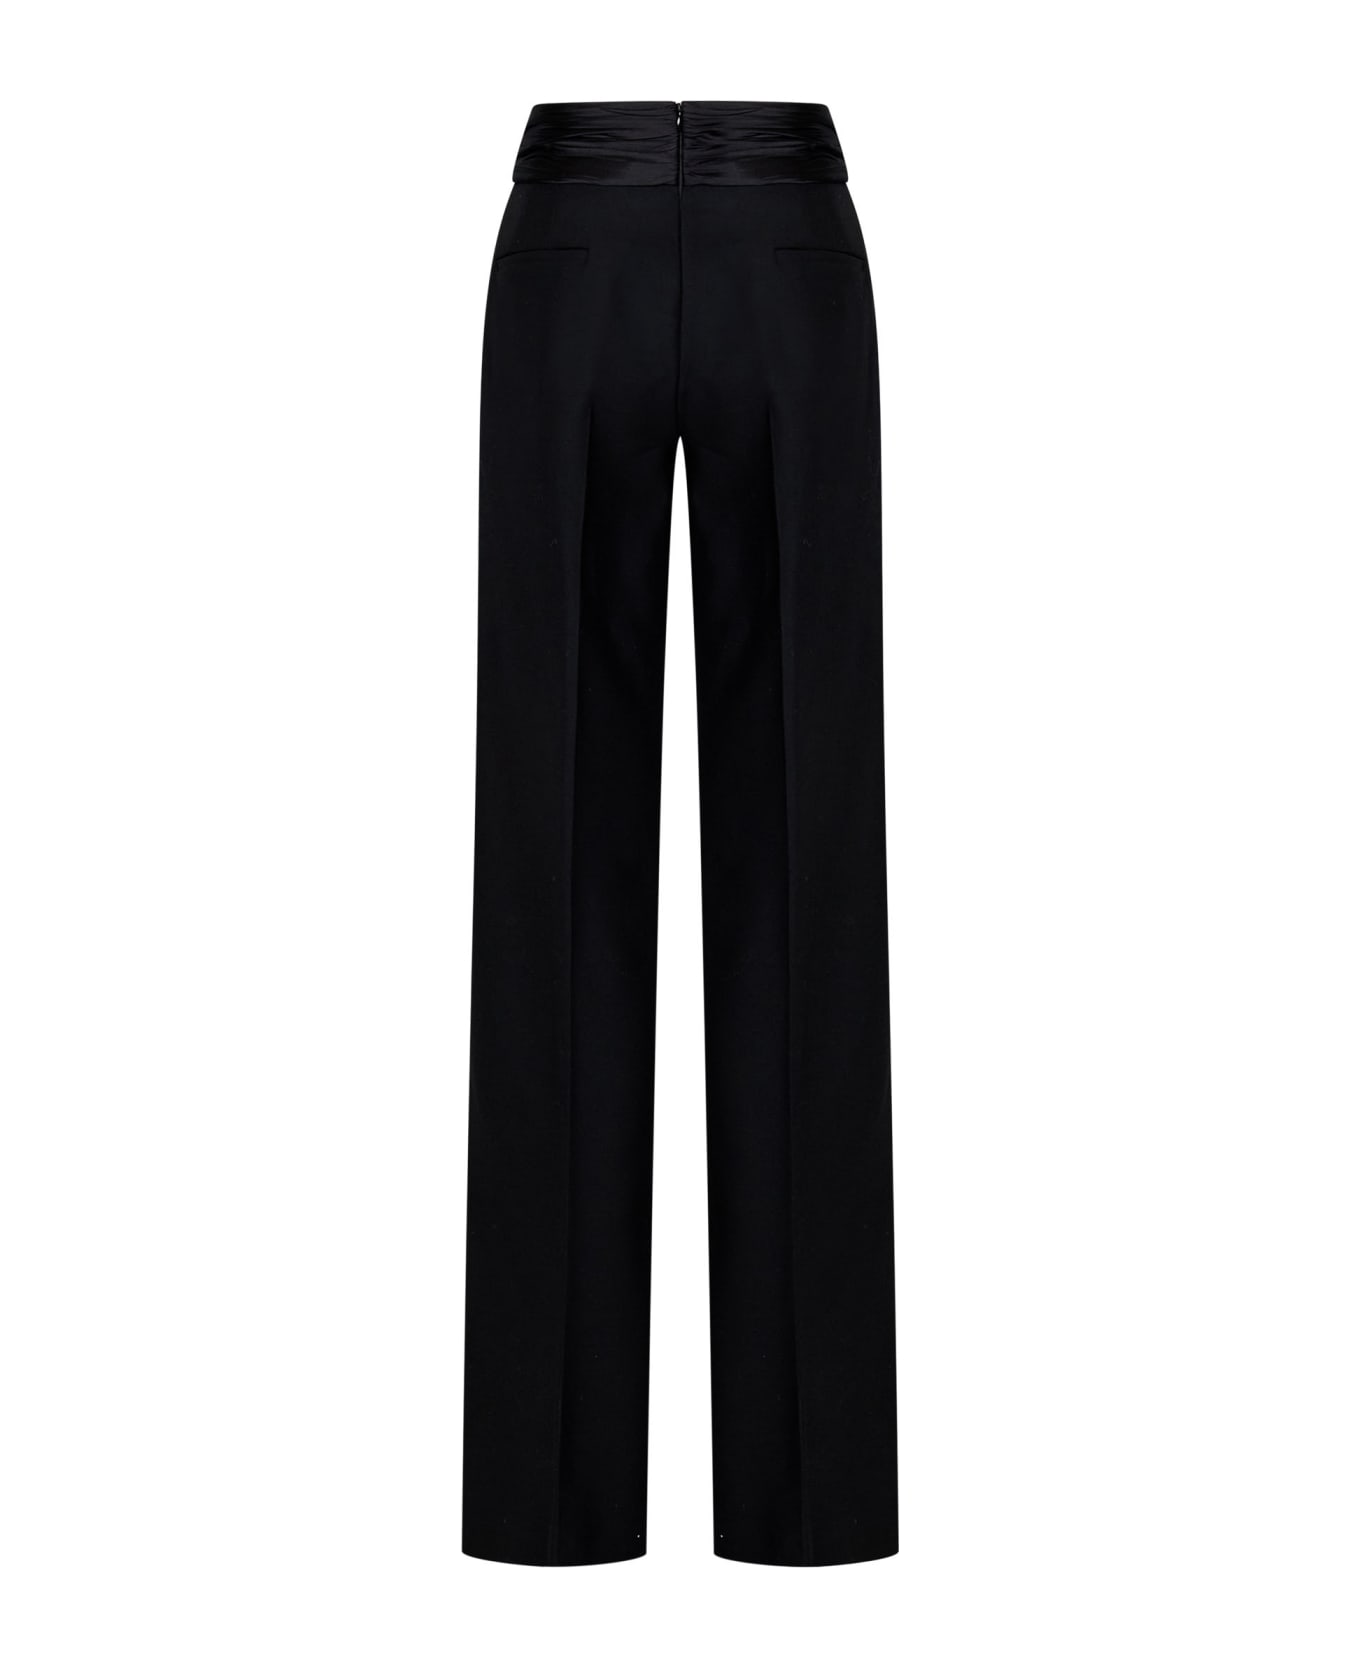 Laquan Smith Trousers - Black ボトムス